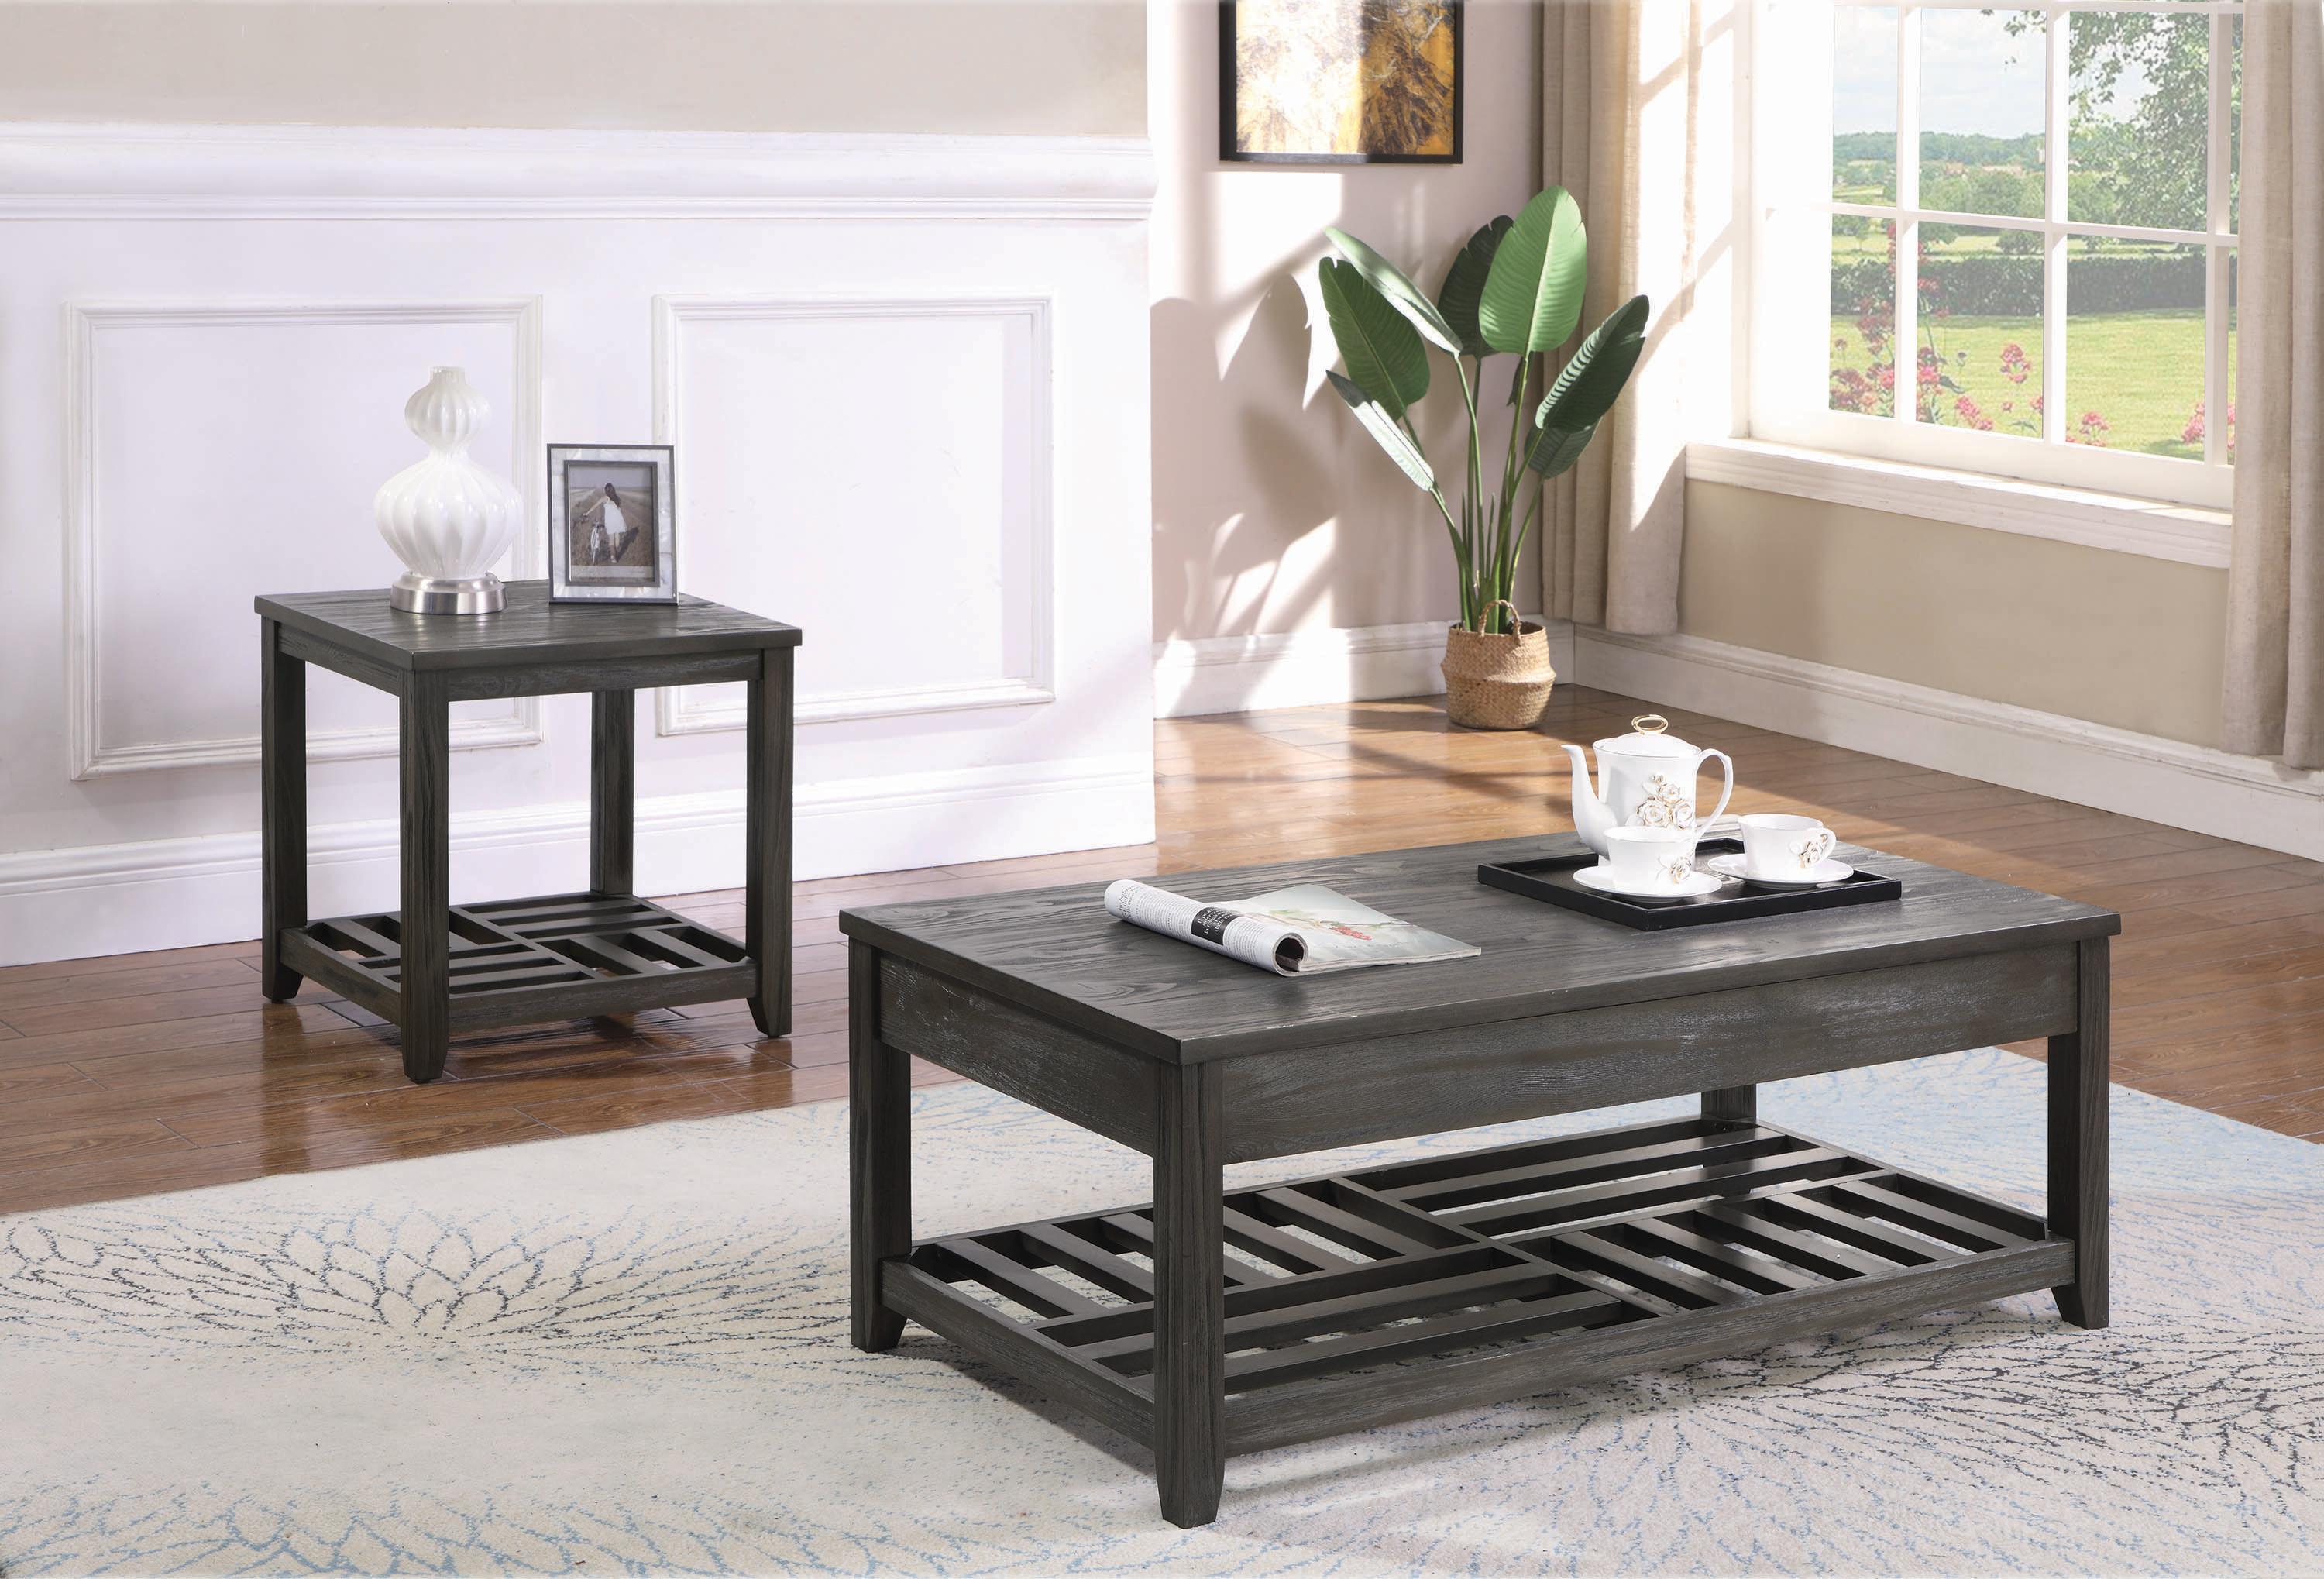 Transitional Coffee Table Set 722288-S2 722288-S2 in Gray 